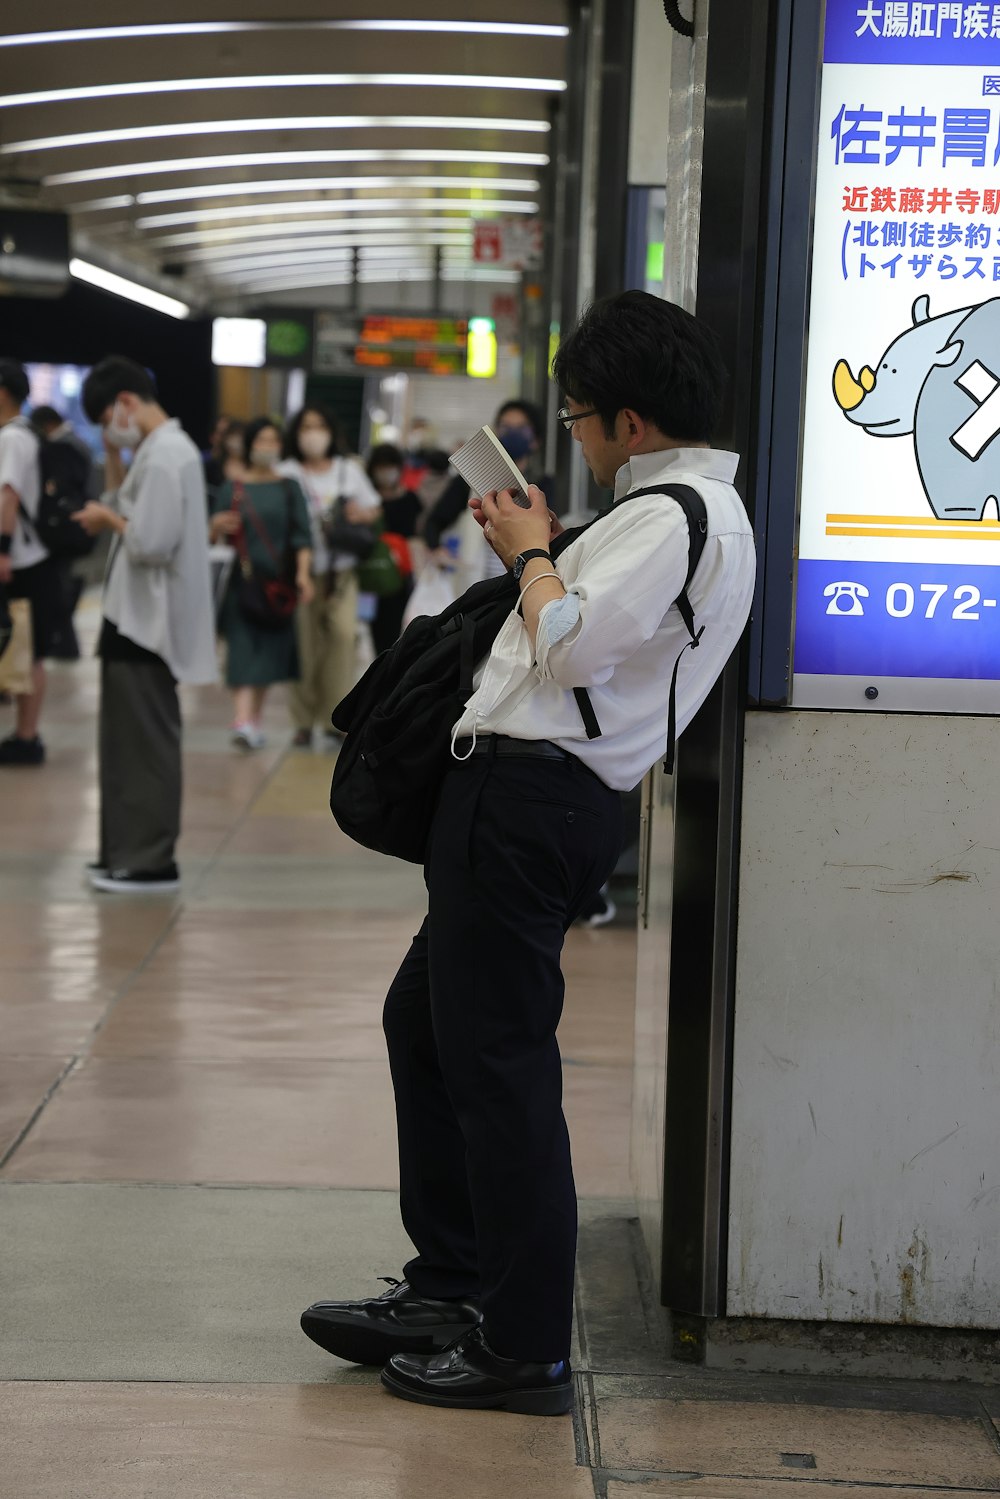 a man standing next to a train station while looking at his cell phone